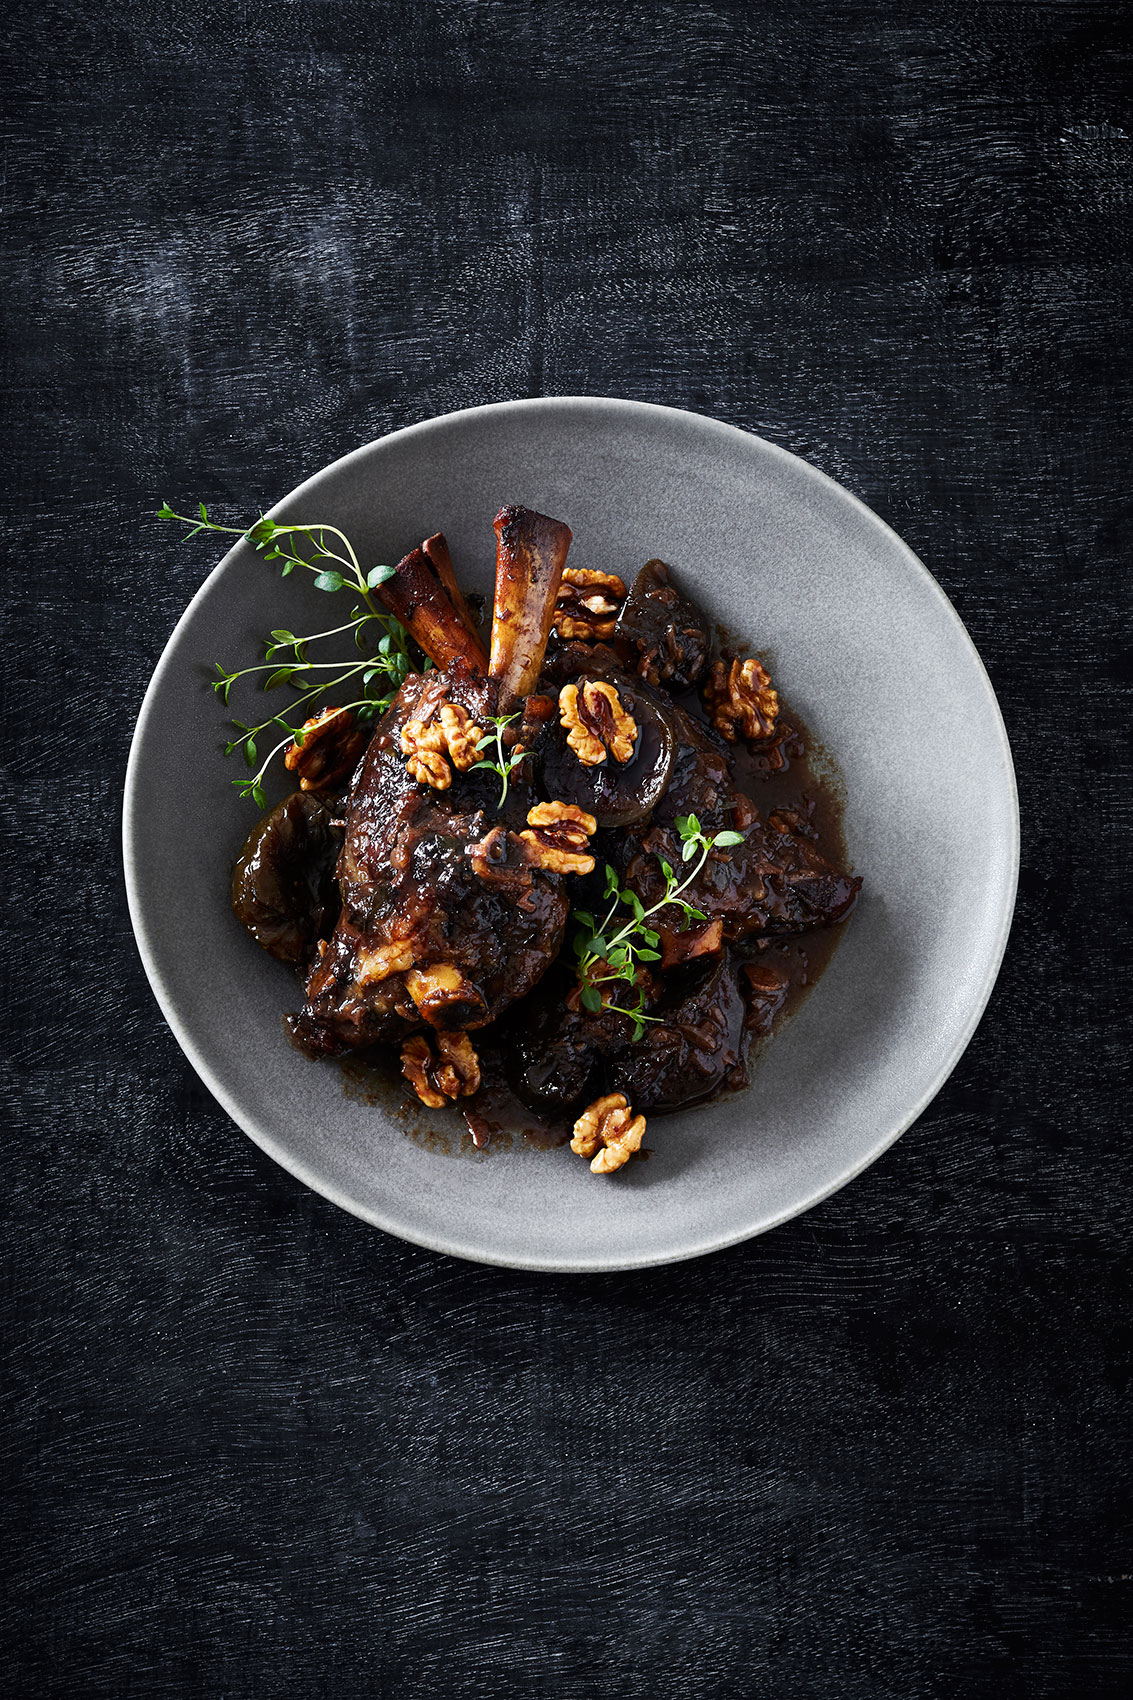 Slow Cooked • Pulled Fig Shanks with Fresh Thyme in Grey Bowl • Cookbook & Editorial Food Photography